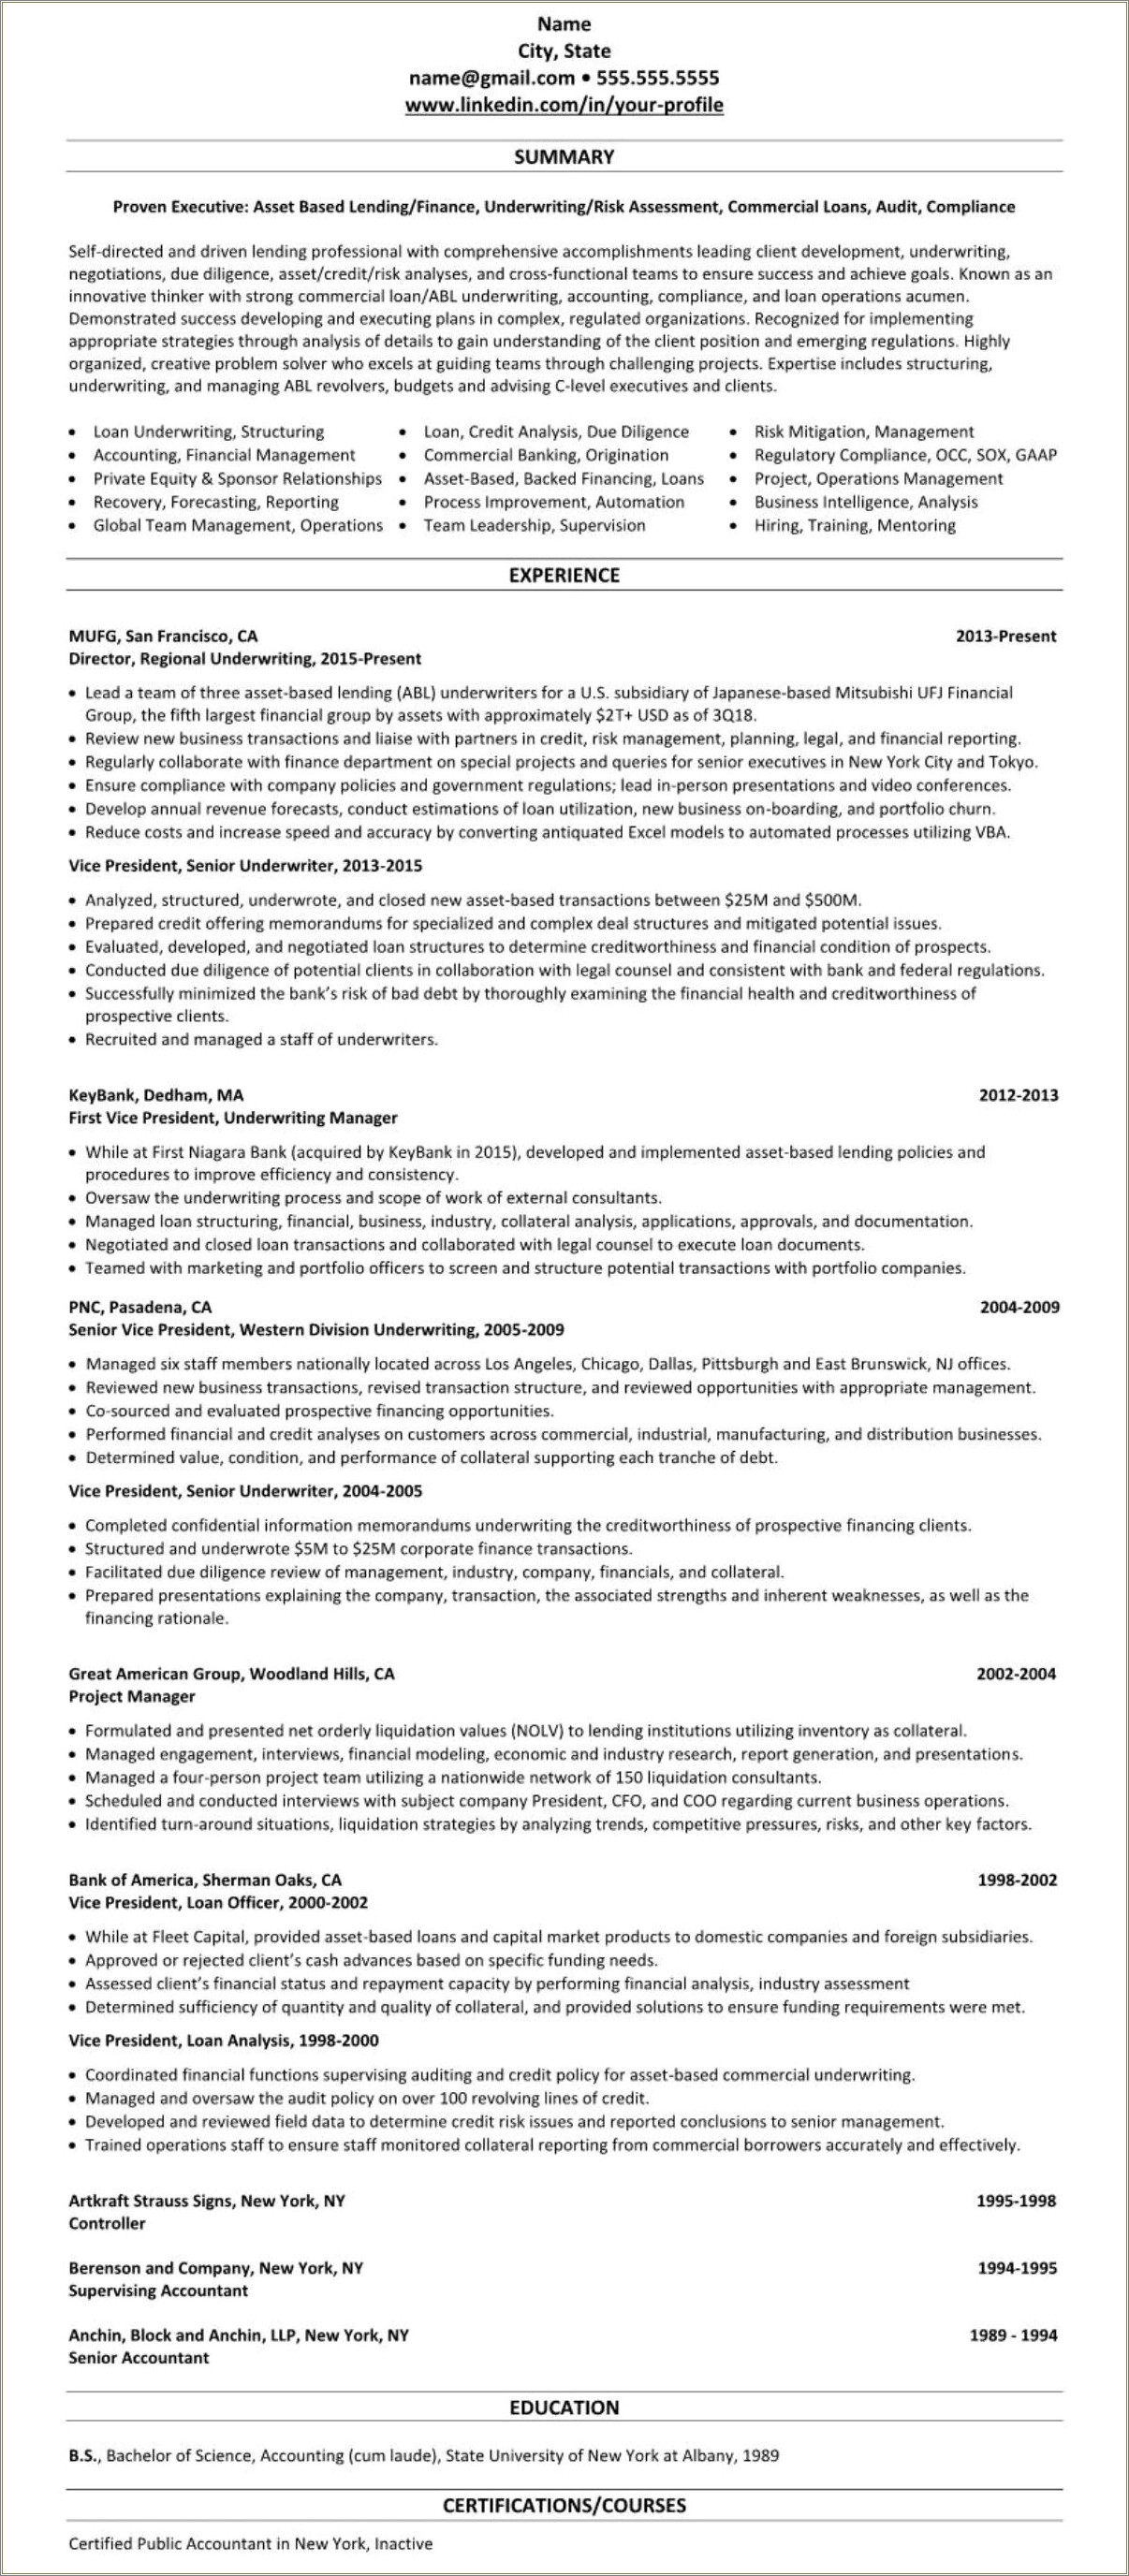 Mortgage Loan Officer Resume For Year Experience